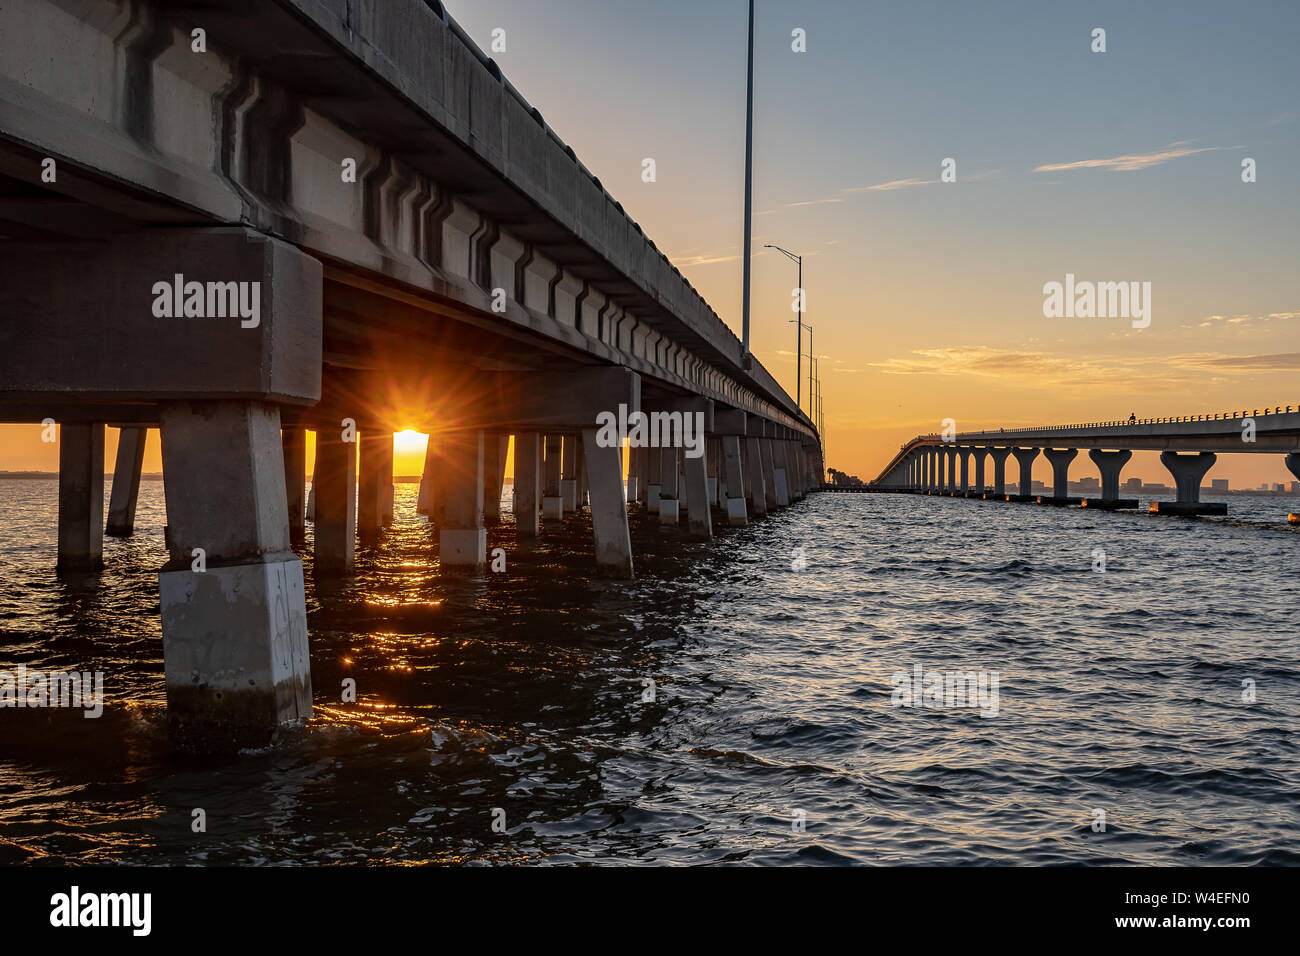 Sunrise under the bridge with a view of the Tampa Bay in Florida Stock Photo